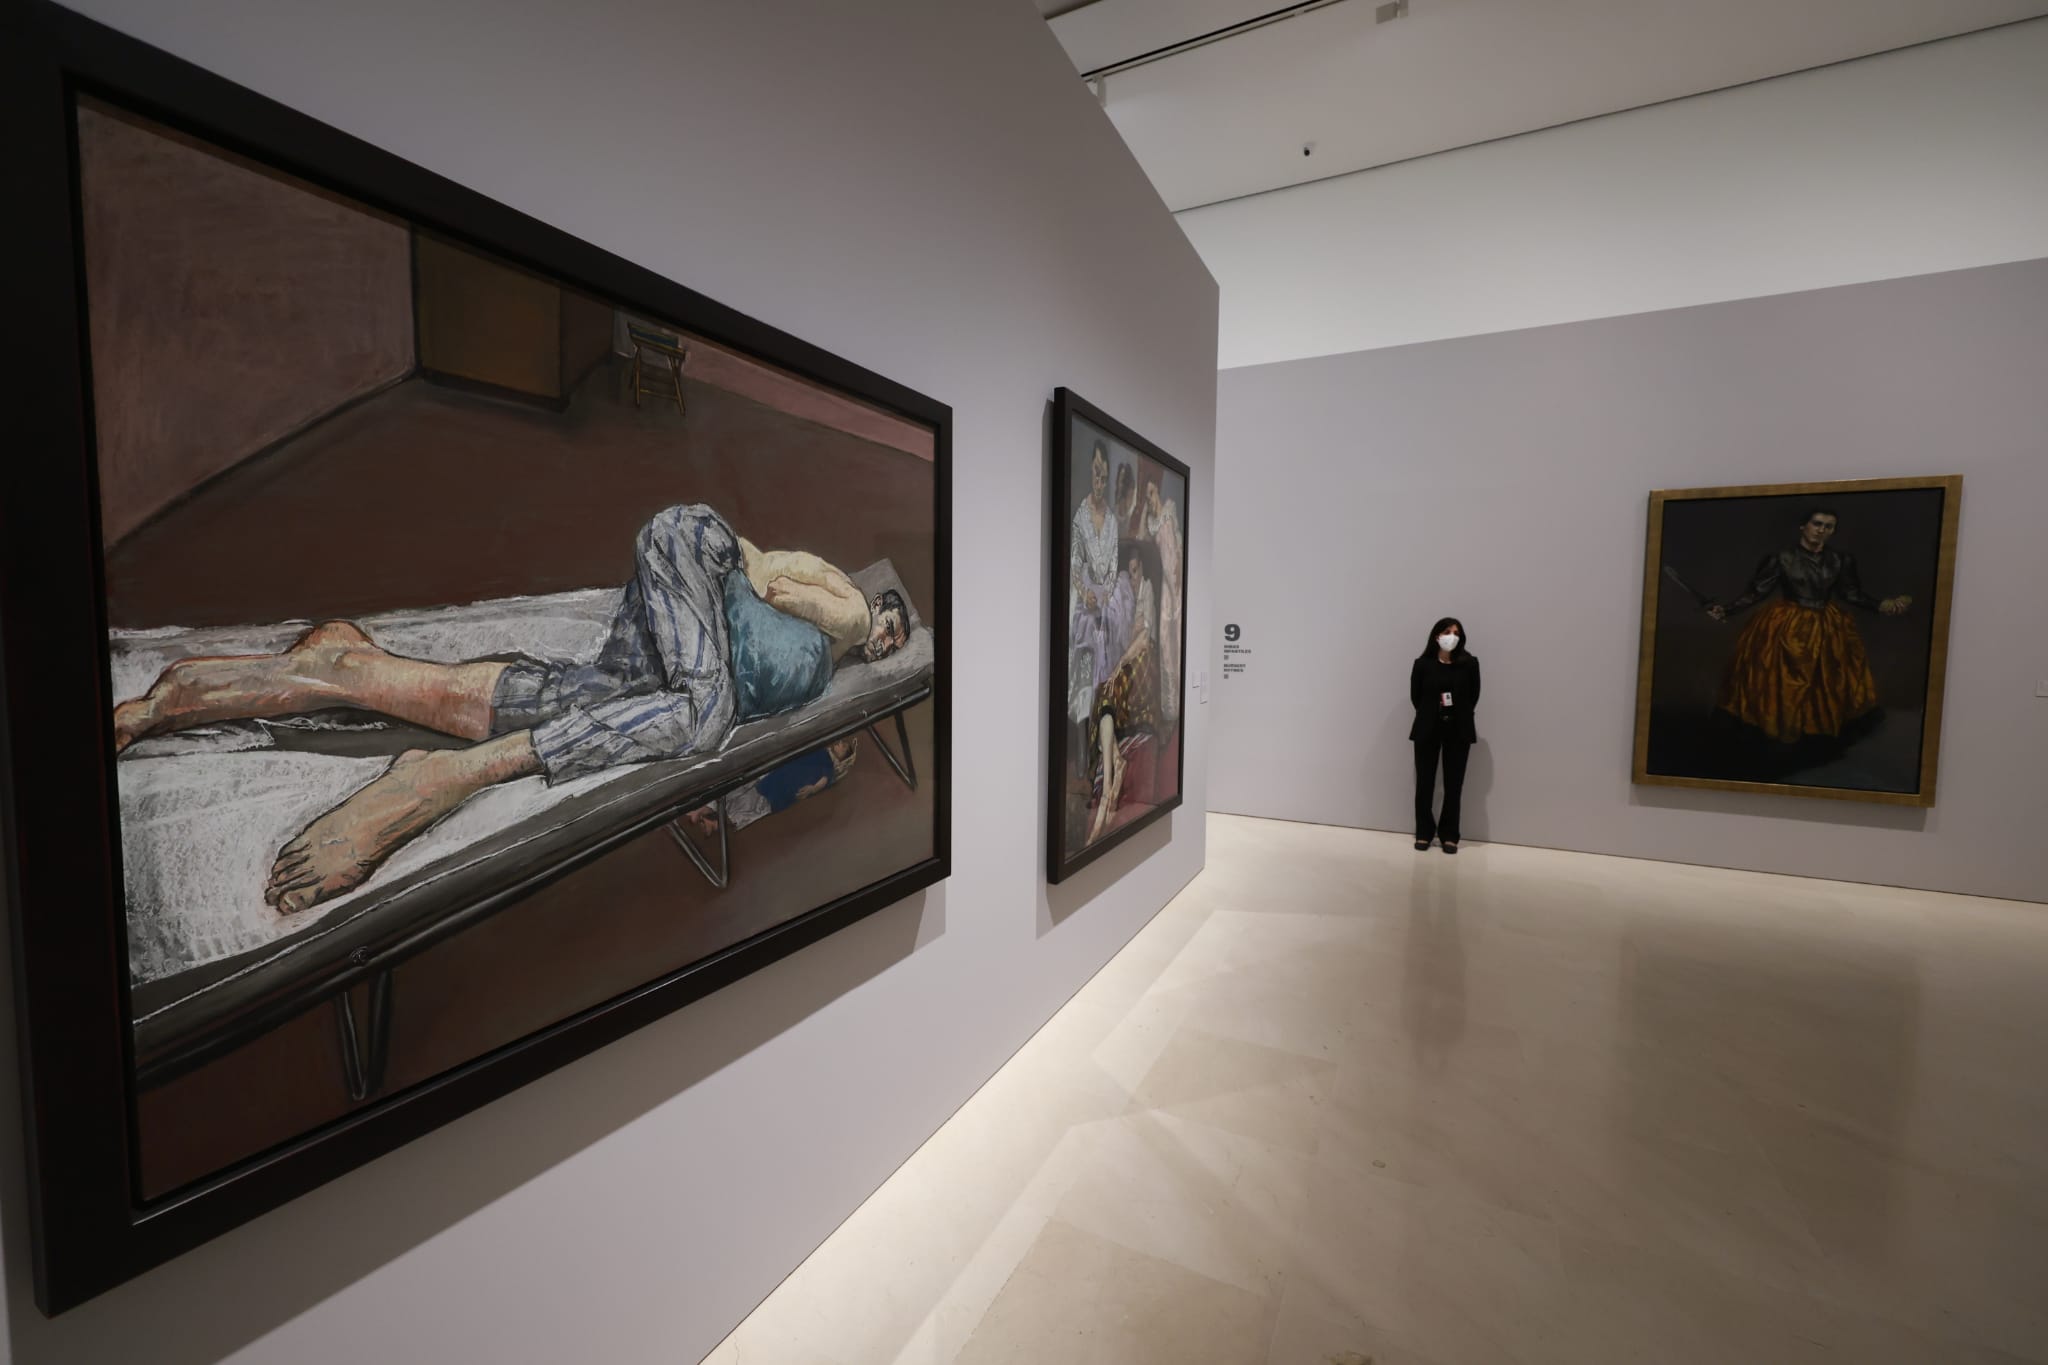 Work by Paula Rego is on display at the Malaga Picasso museum until 21 August 2022.